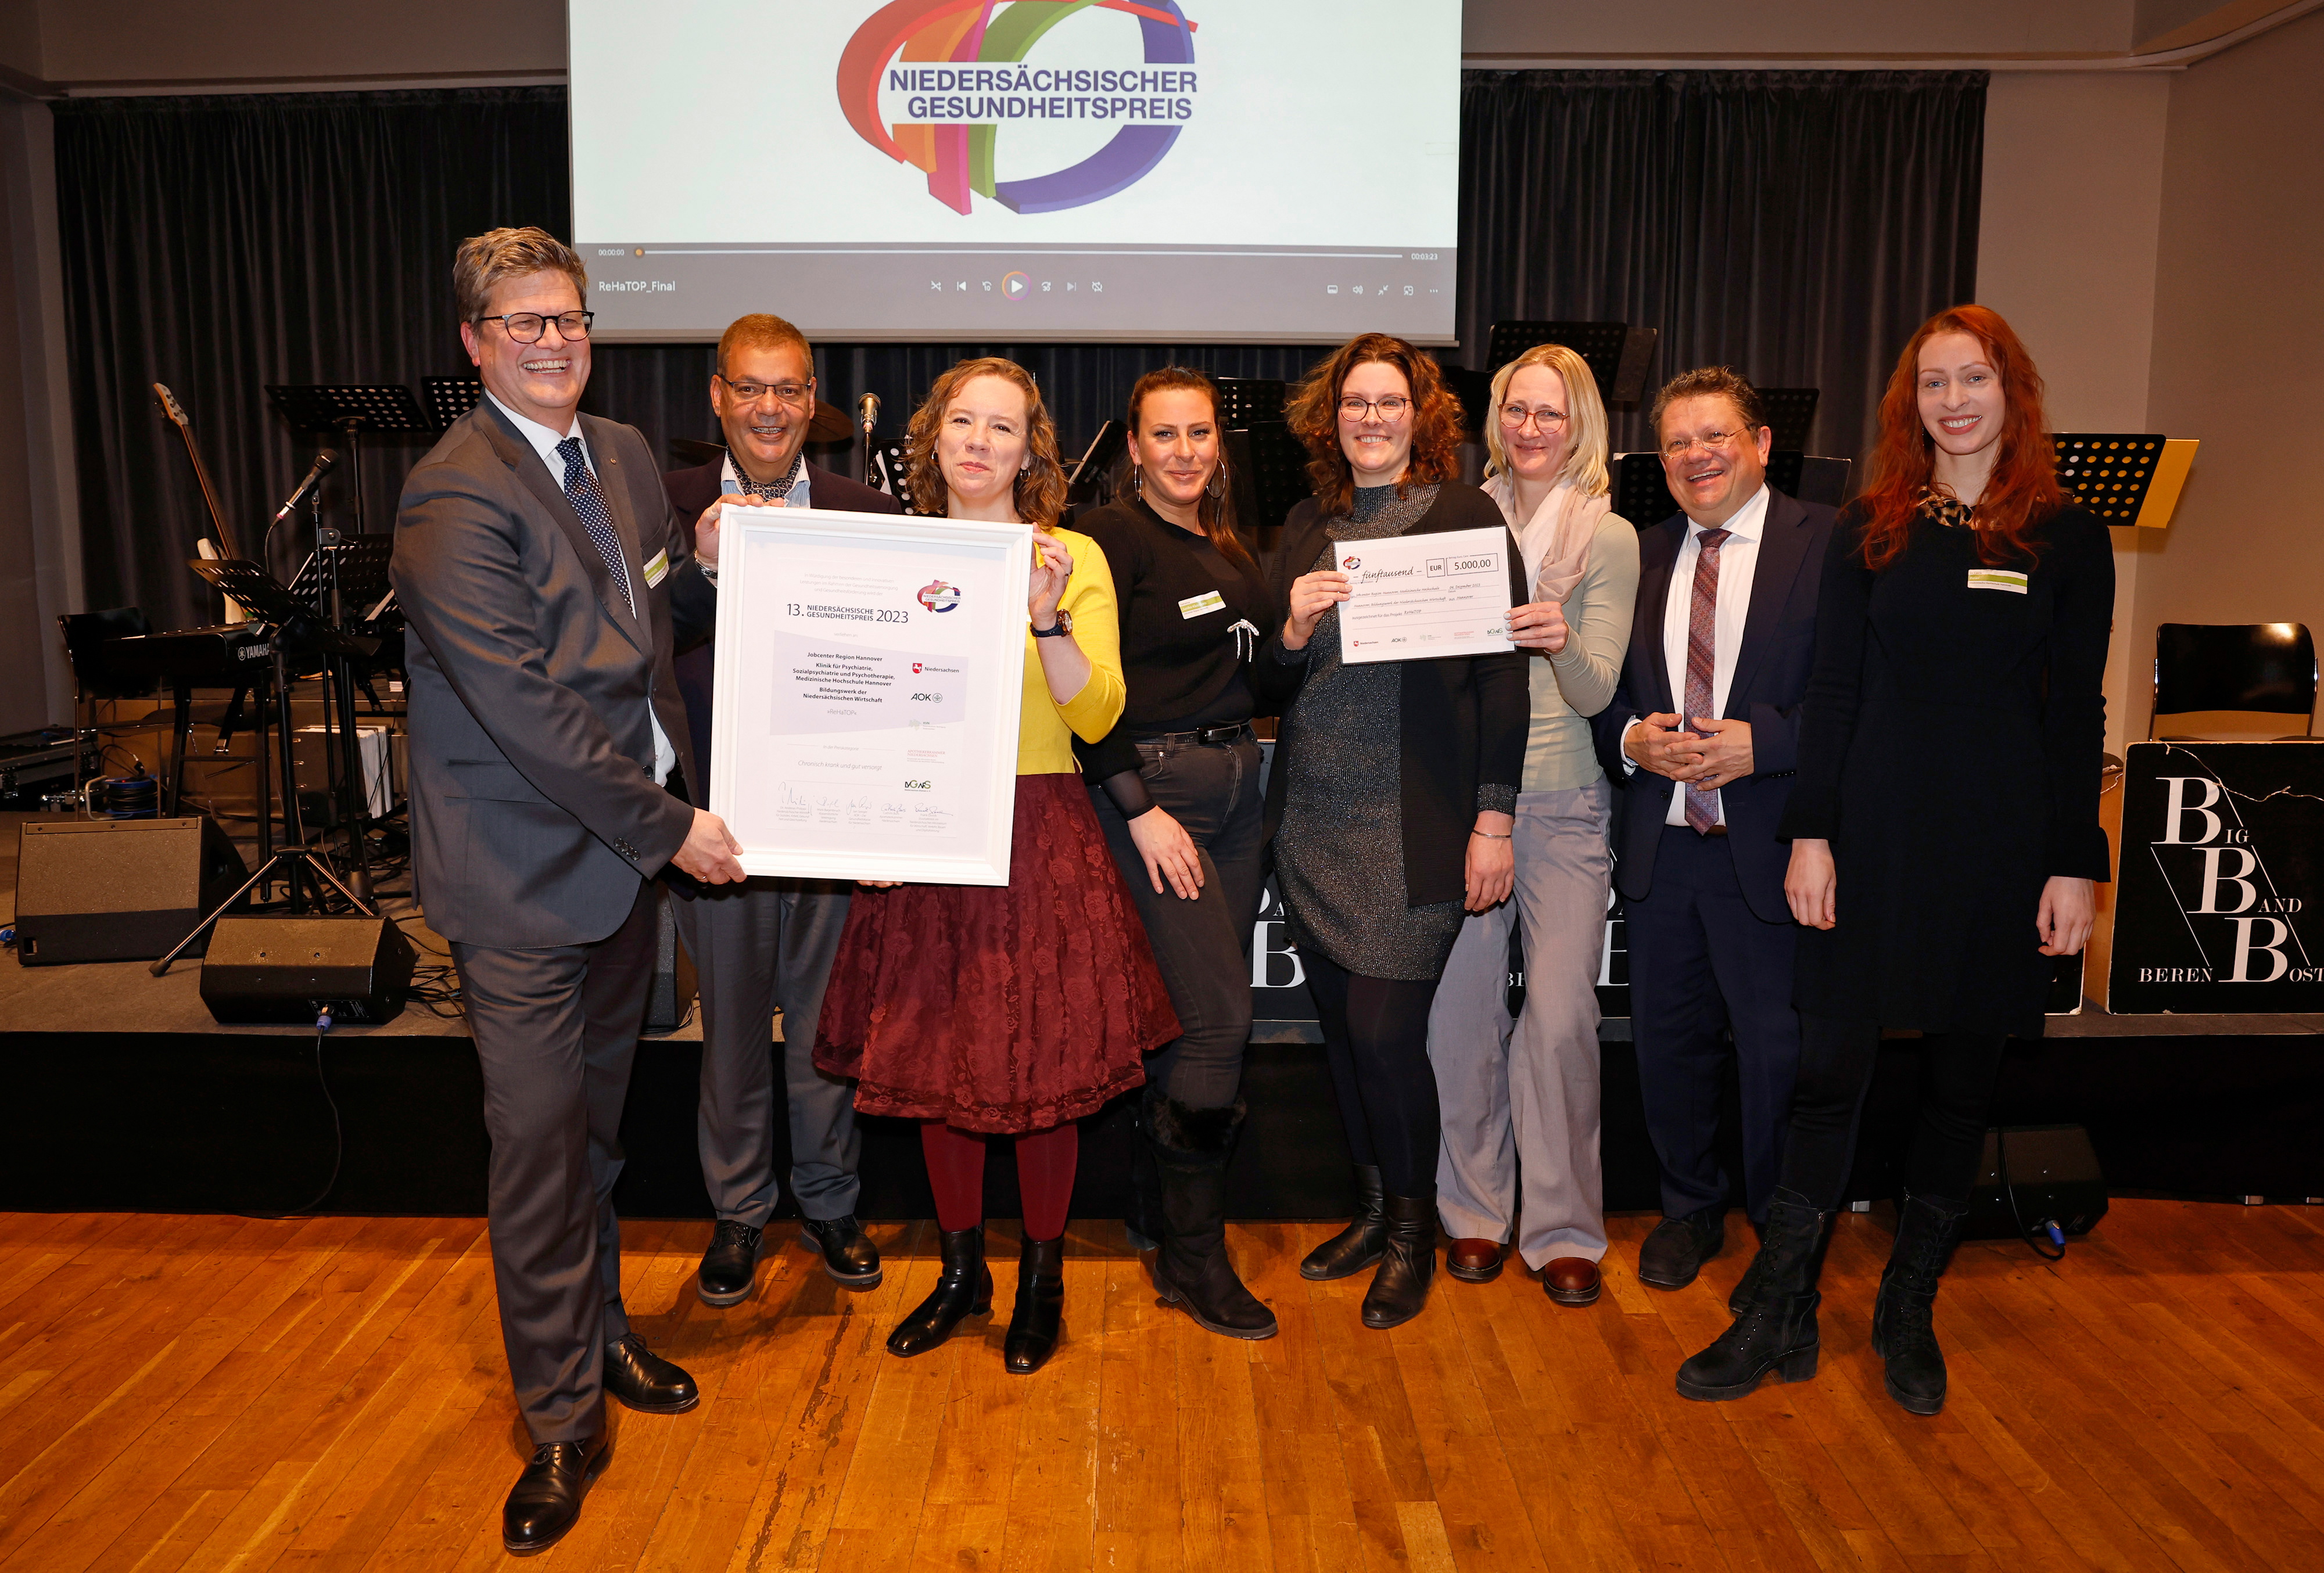 Award for an excellent project: Health Minister Dr. Andreas Philippi (second from the right) celebrates with the ReHaTOP team. Copyright: Lars Kaletta